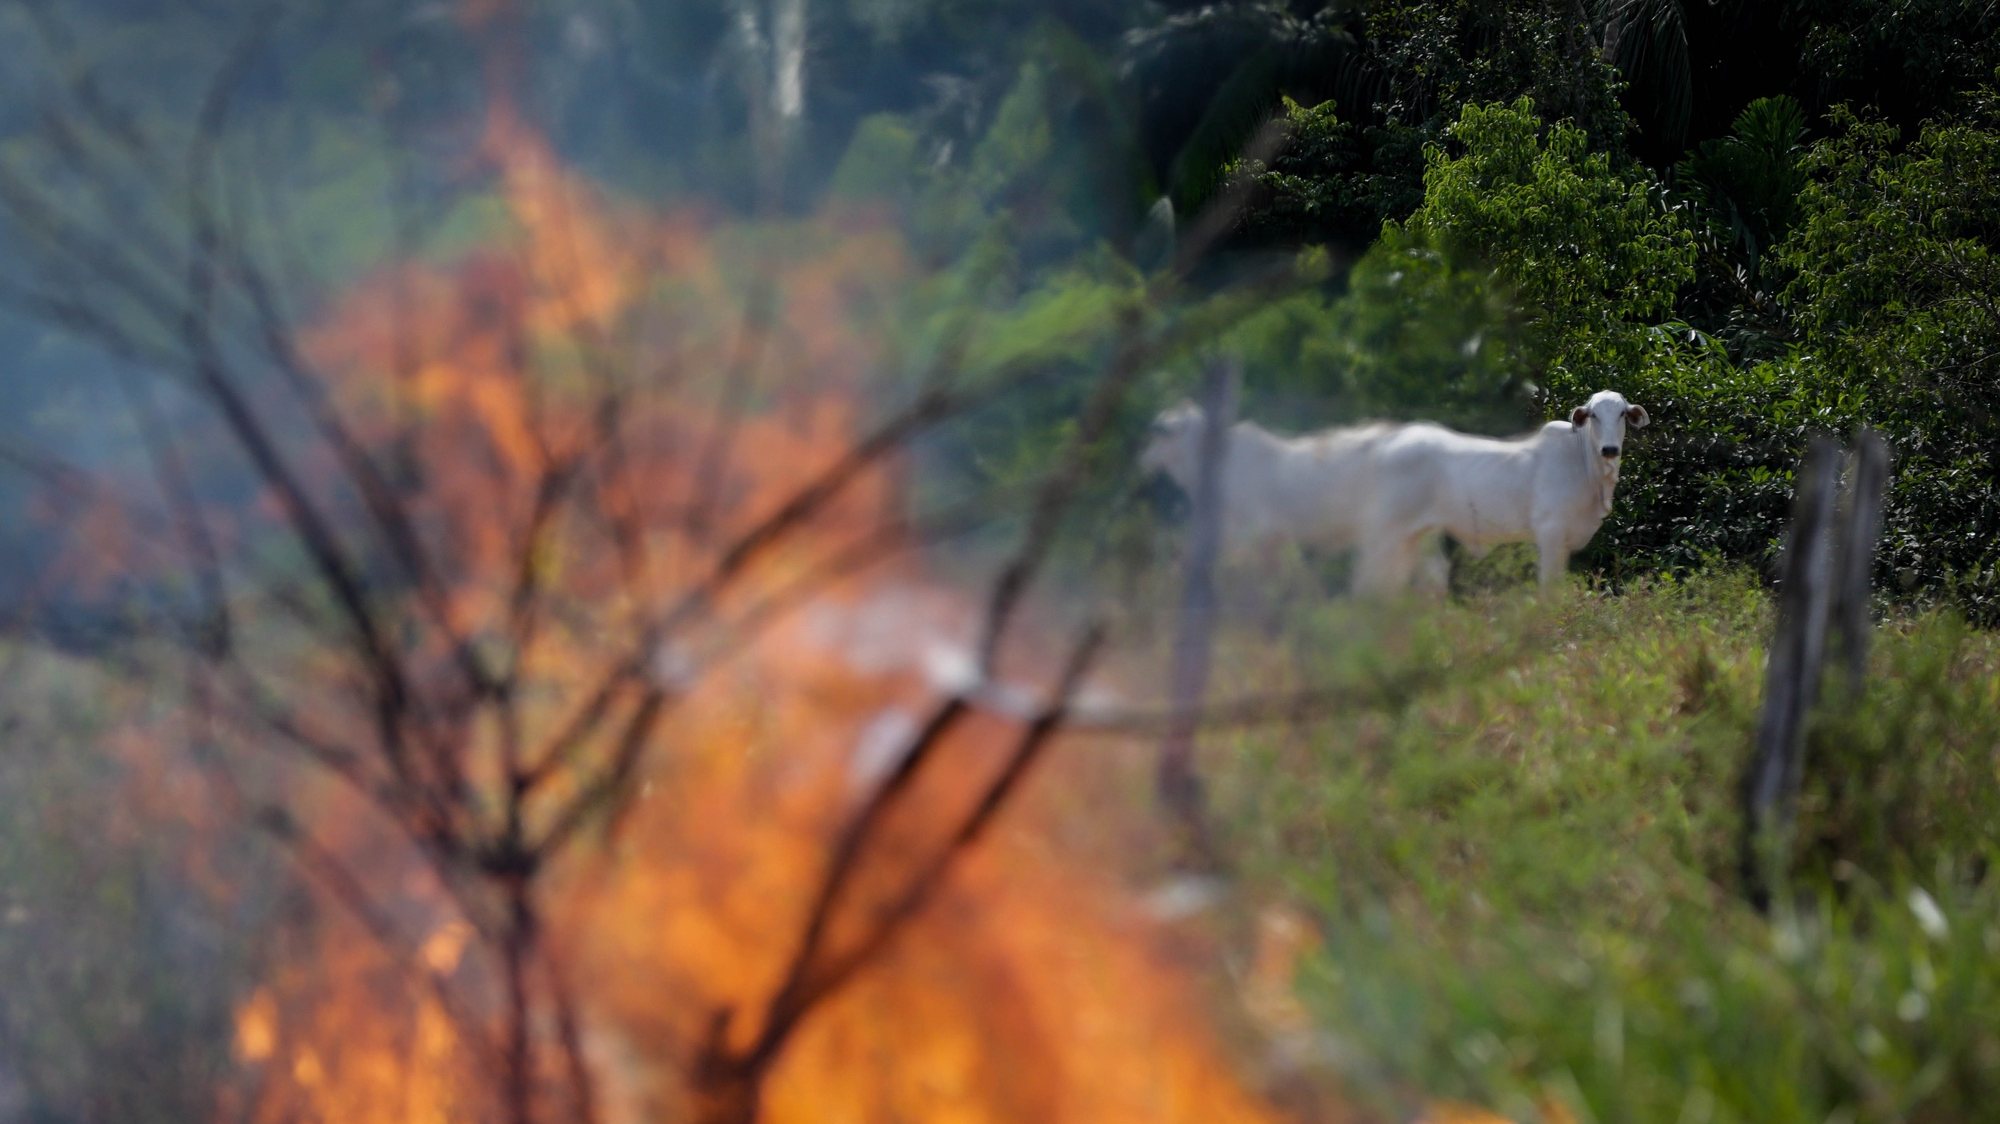 epa07827062 Cattle feed in the vacinity of a fire in Manicore, Amazonas state, Brazil, 07 September 2019. Prevfogo firefighters, an Ibama forest brigade formed by indigenous people of the Tenhari ethnic group, are participating in fire fighting efforts in the area.  EPA/FERNANDO BIZERRA JR